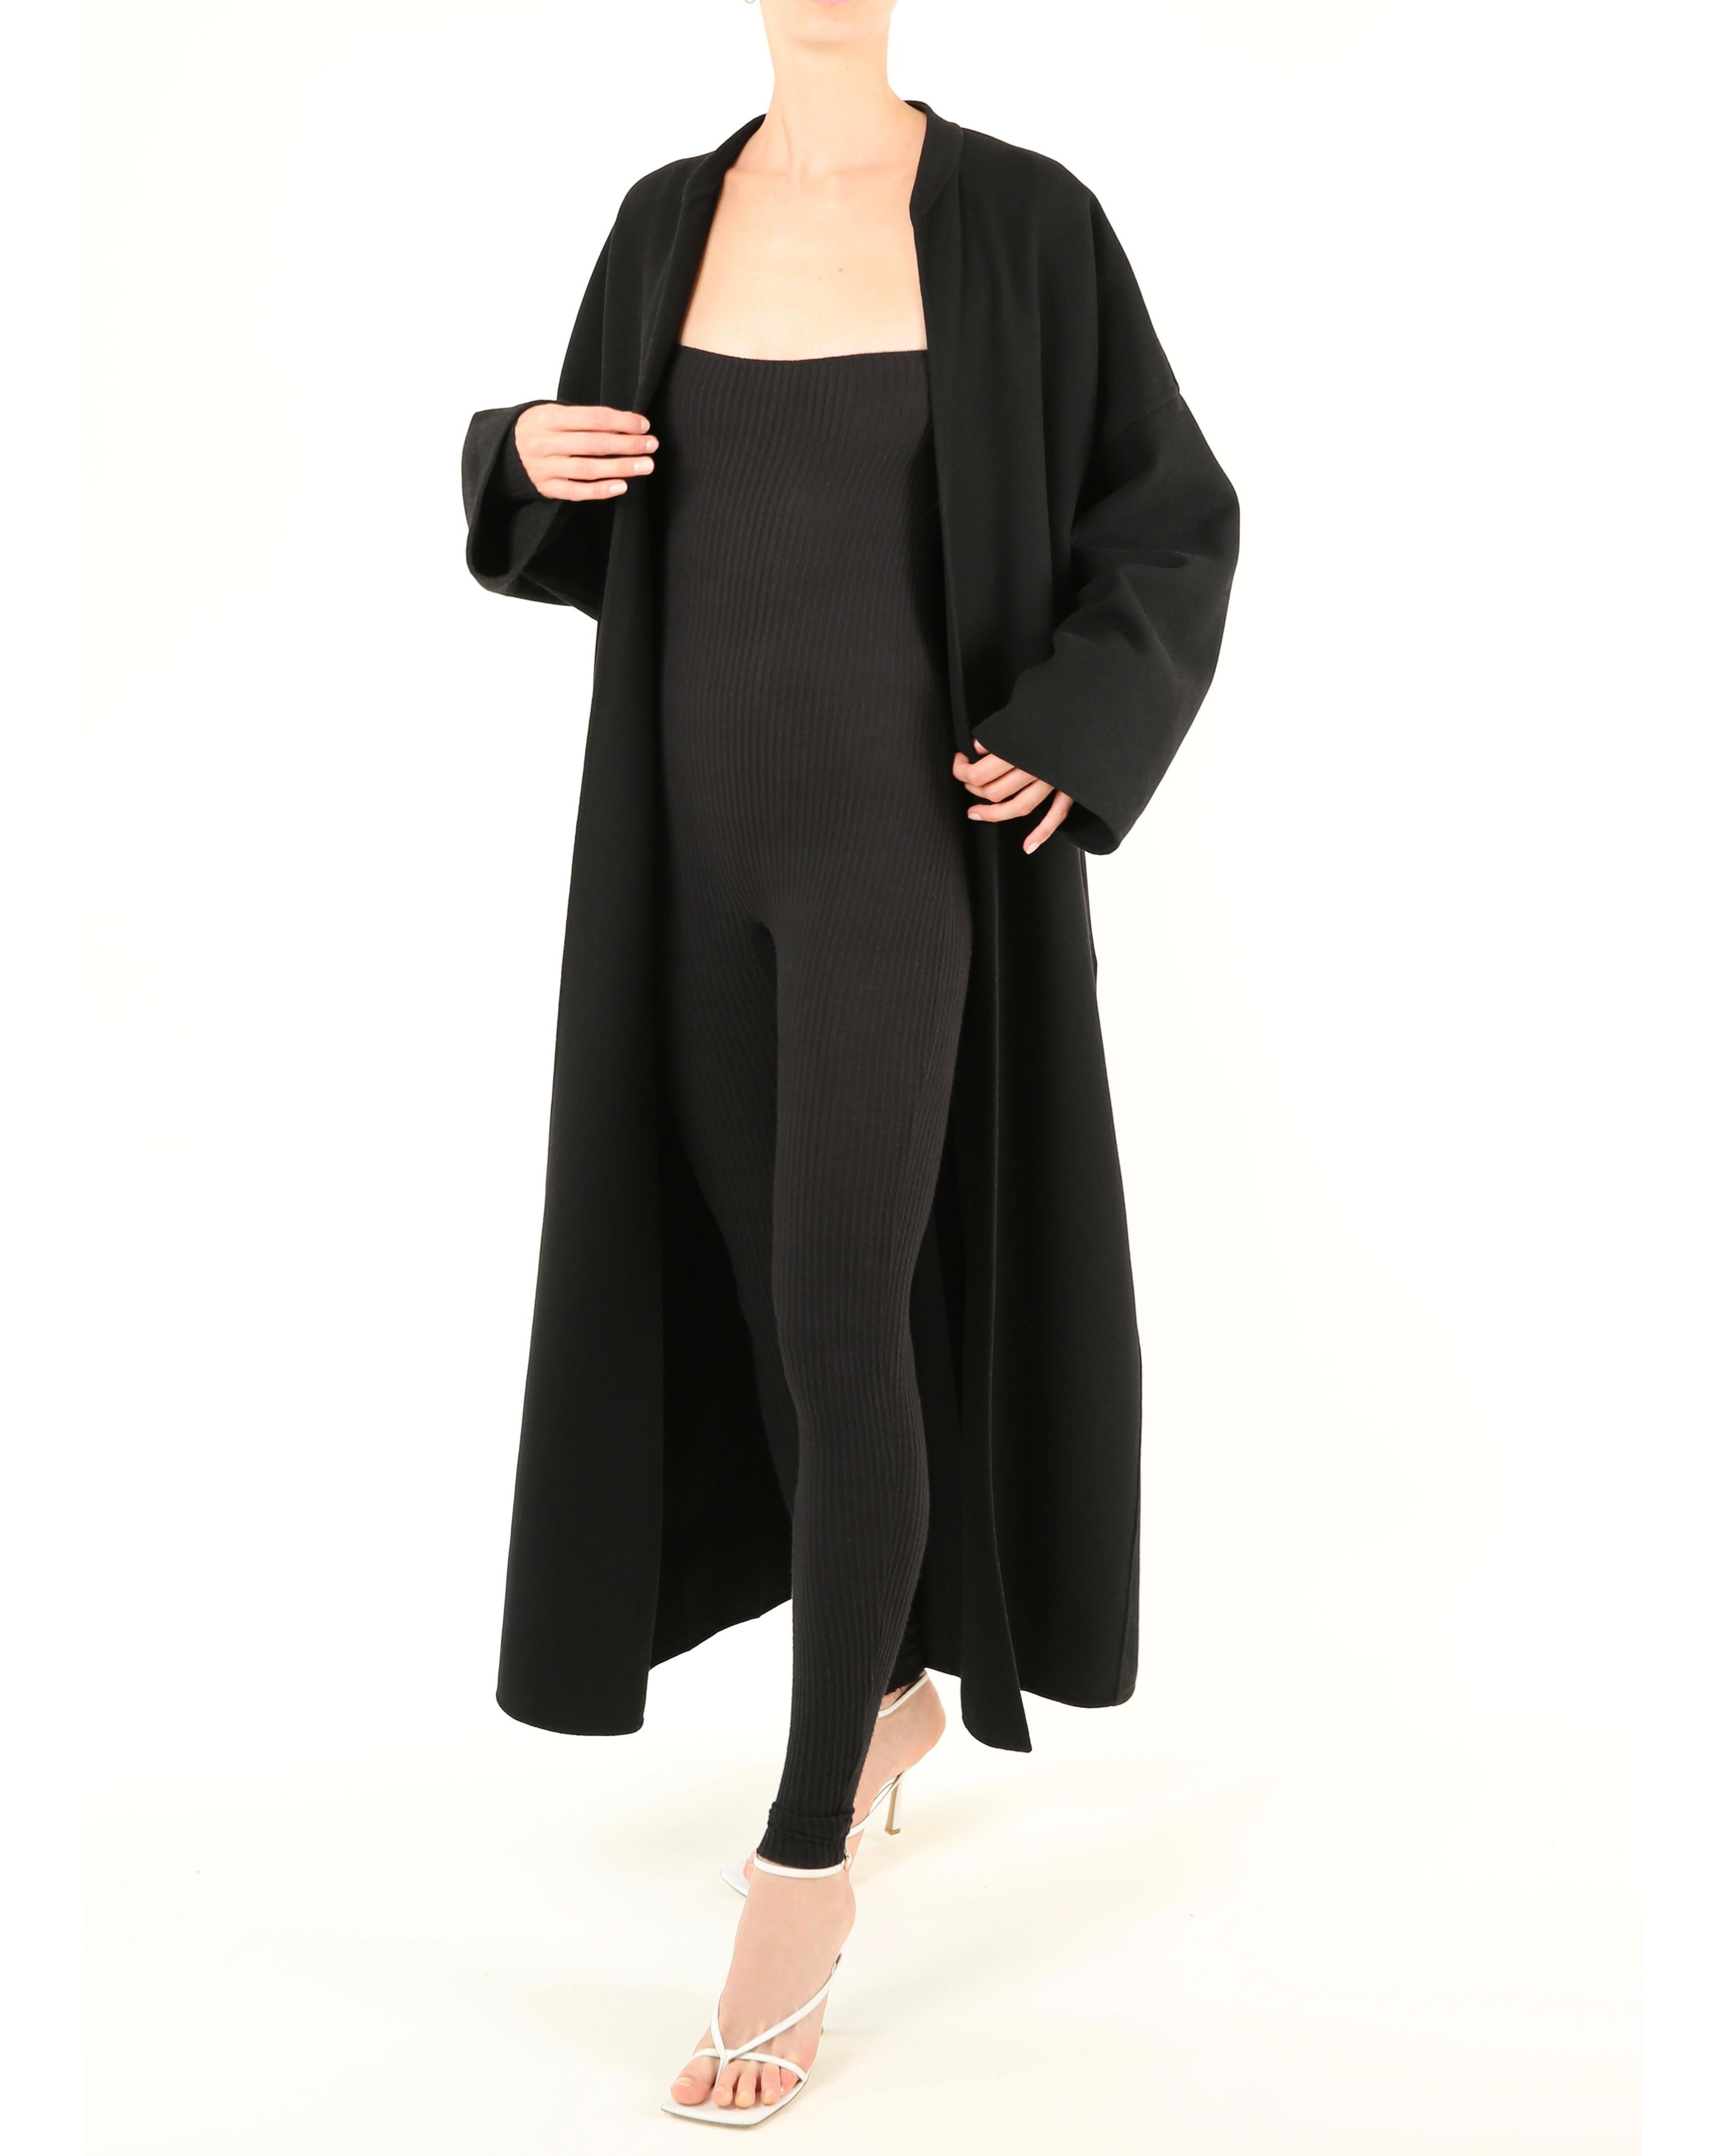 LOVE LALI Vintage

Jean Paul Gaultier vintage black wool cocoon style open over coat
Drop shoulders 
Pleated back detail
Whilst this shows as not quite full length on my model, she is very tall, so this would be full length on someone of lesser